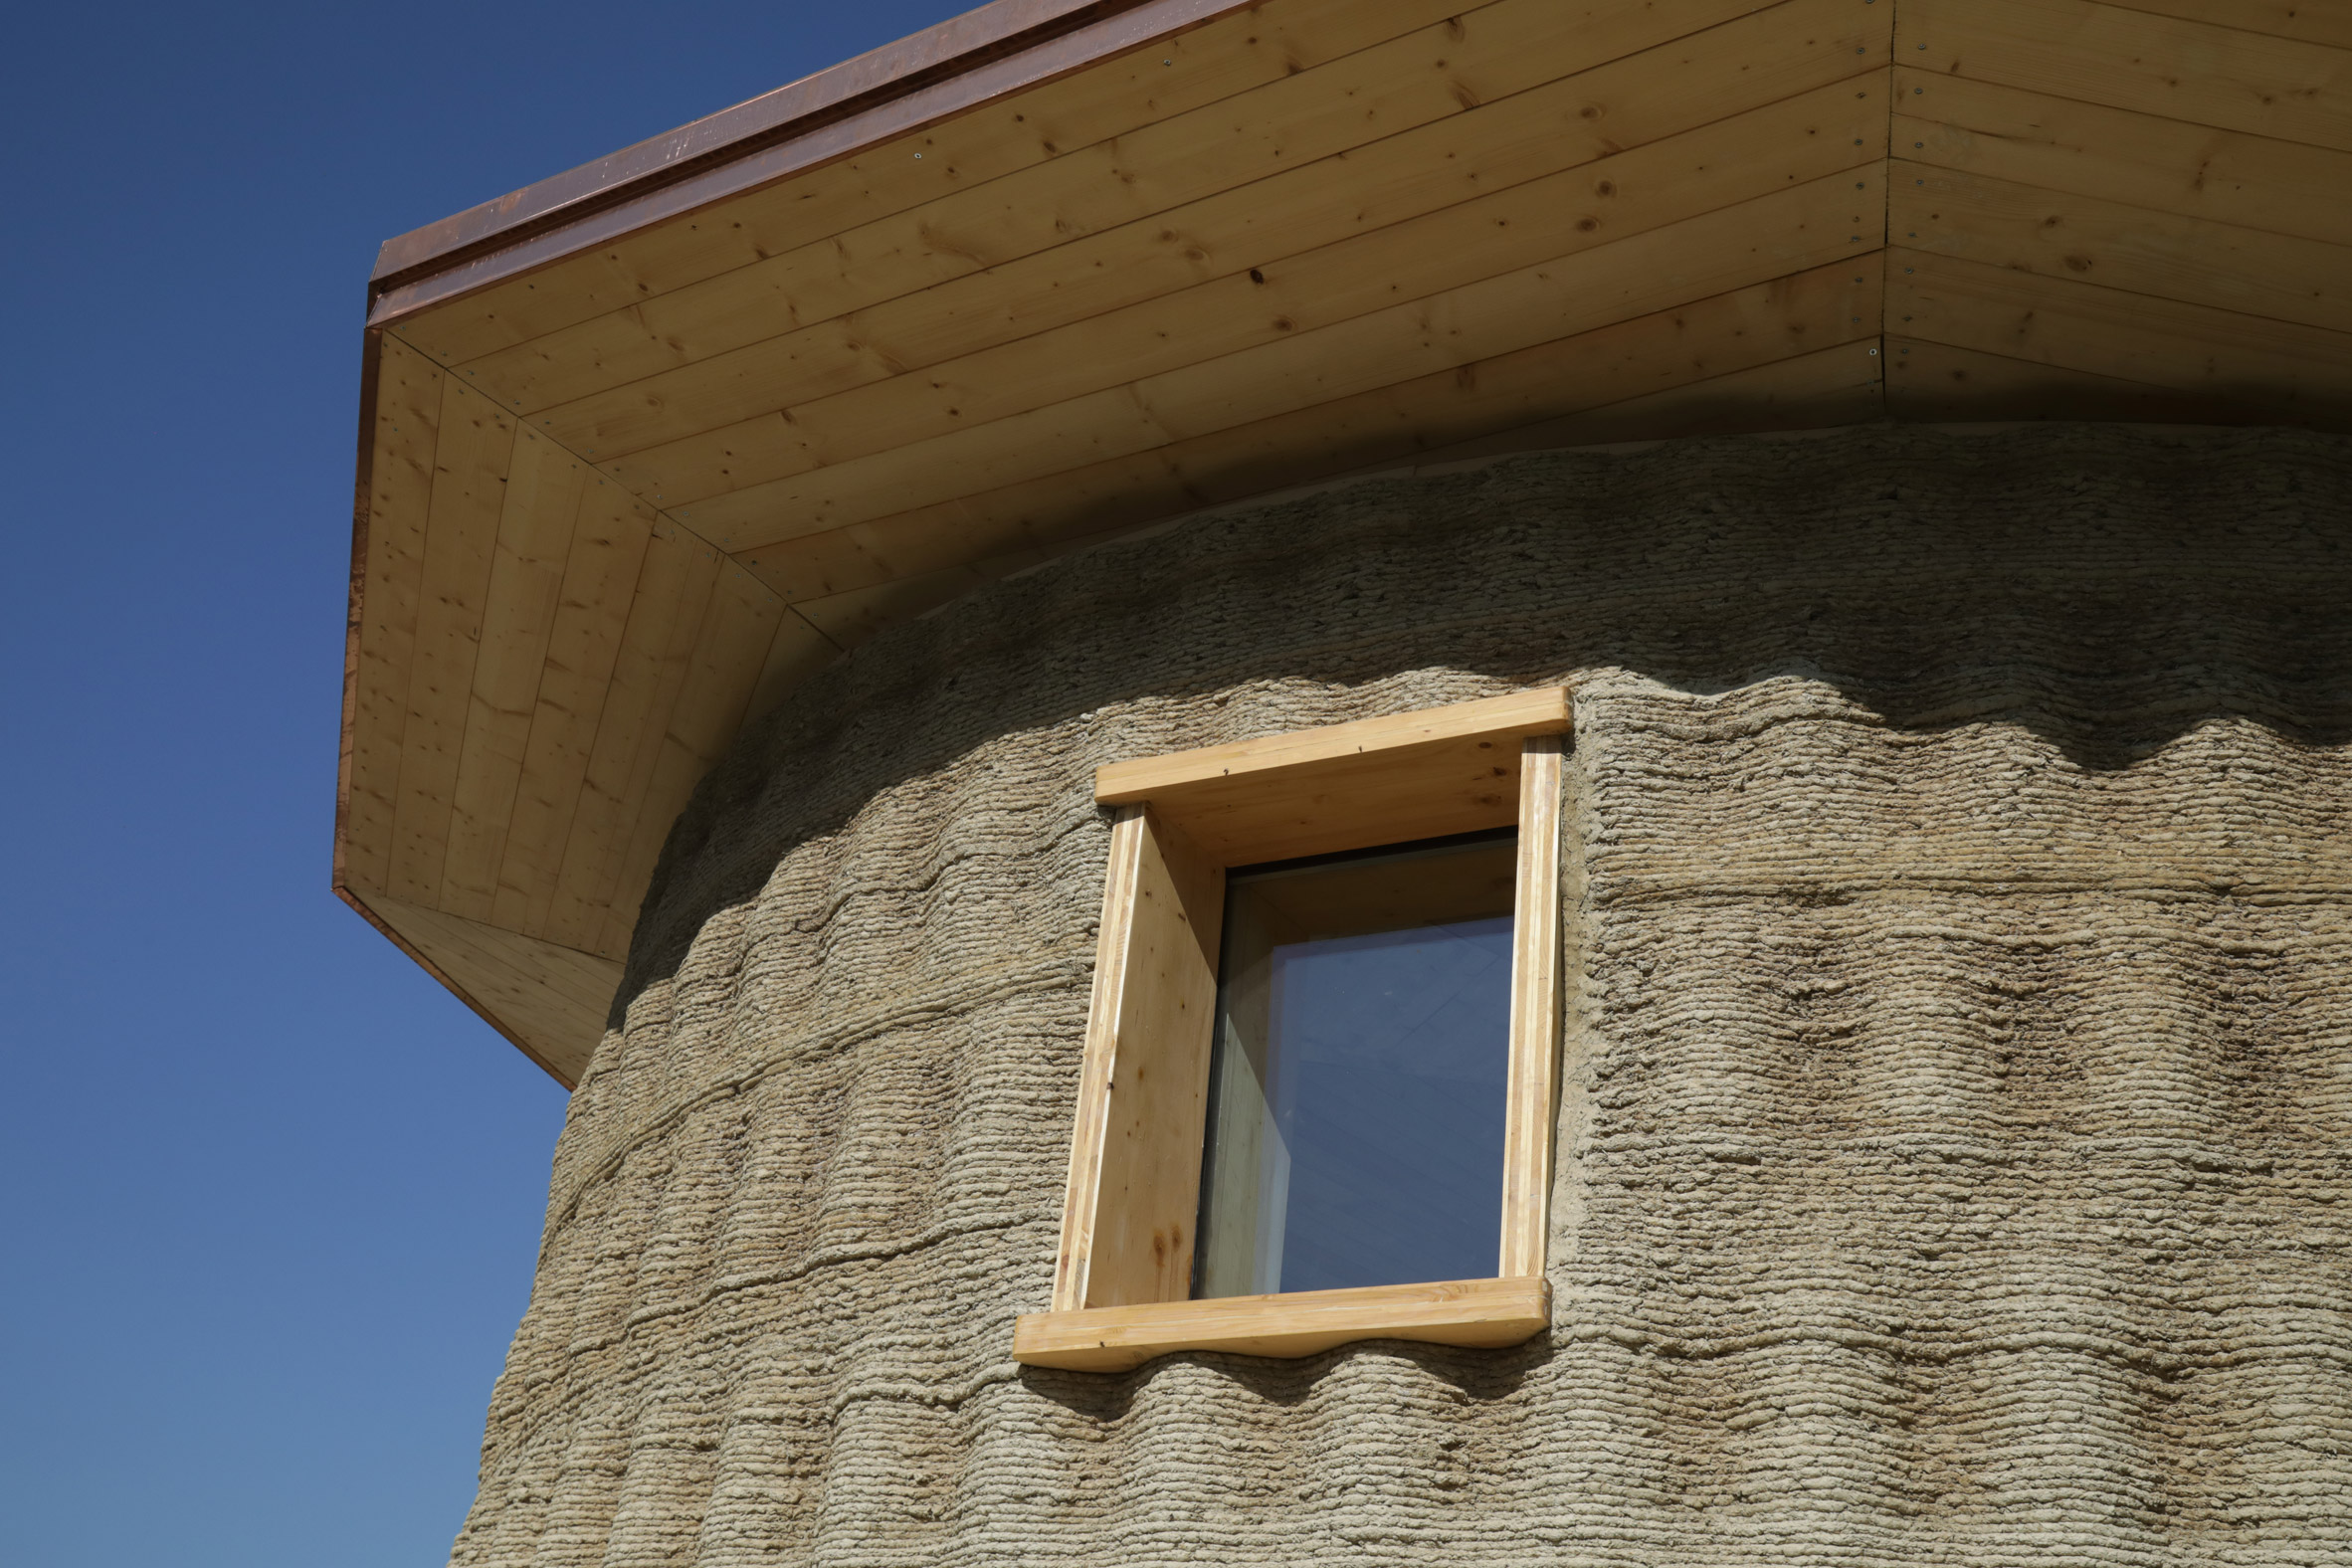 Gaia is a 3D-printed house by WASP made from biodegradable materials